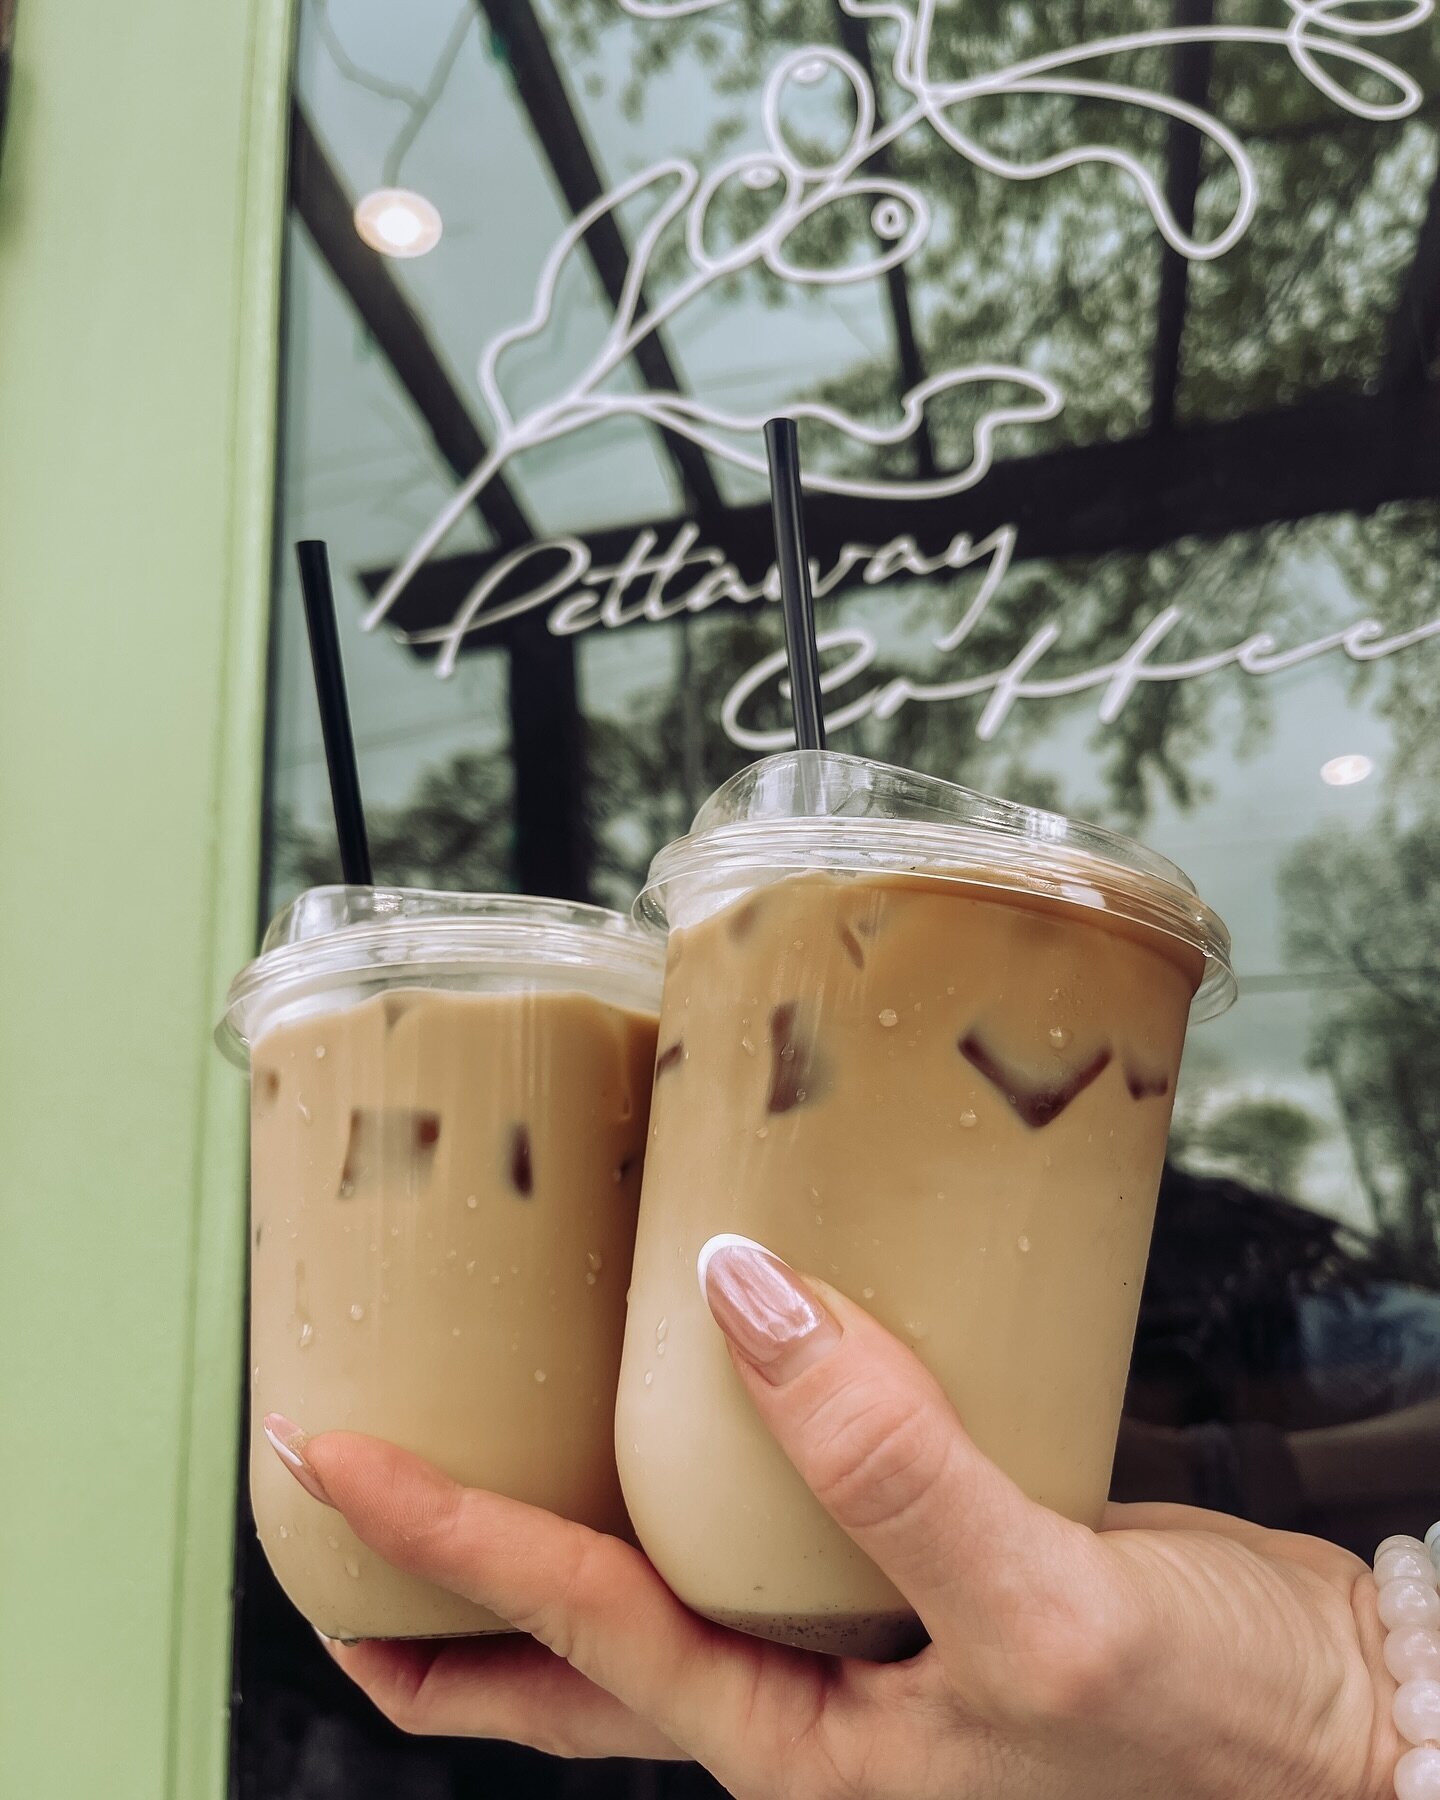 If you&rsquo;re seeing this iced latte it&rsquo;s a sign you should see us tomorrow! Tag a friend that needs to plan for a sweet treat on Monday. 

We&rsquo;ll be open tomorrow 7 - 5 pm serving up your faves and a surprise solar eclipse drink. We&rsq